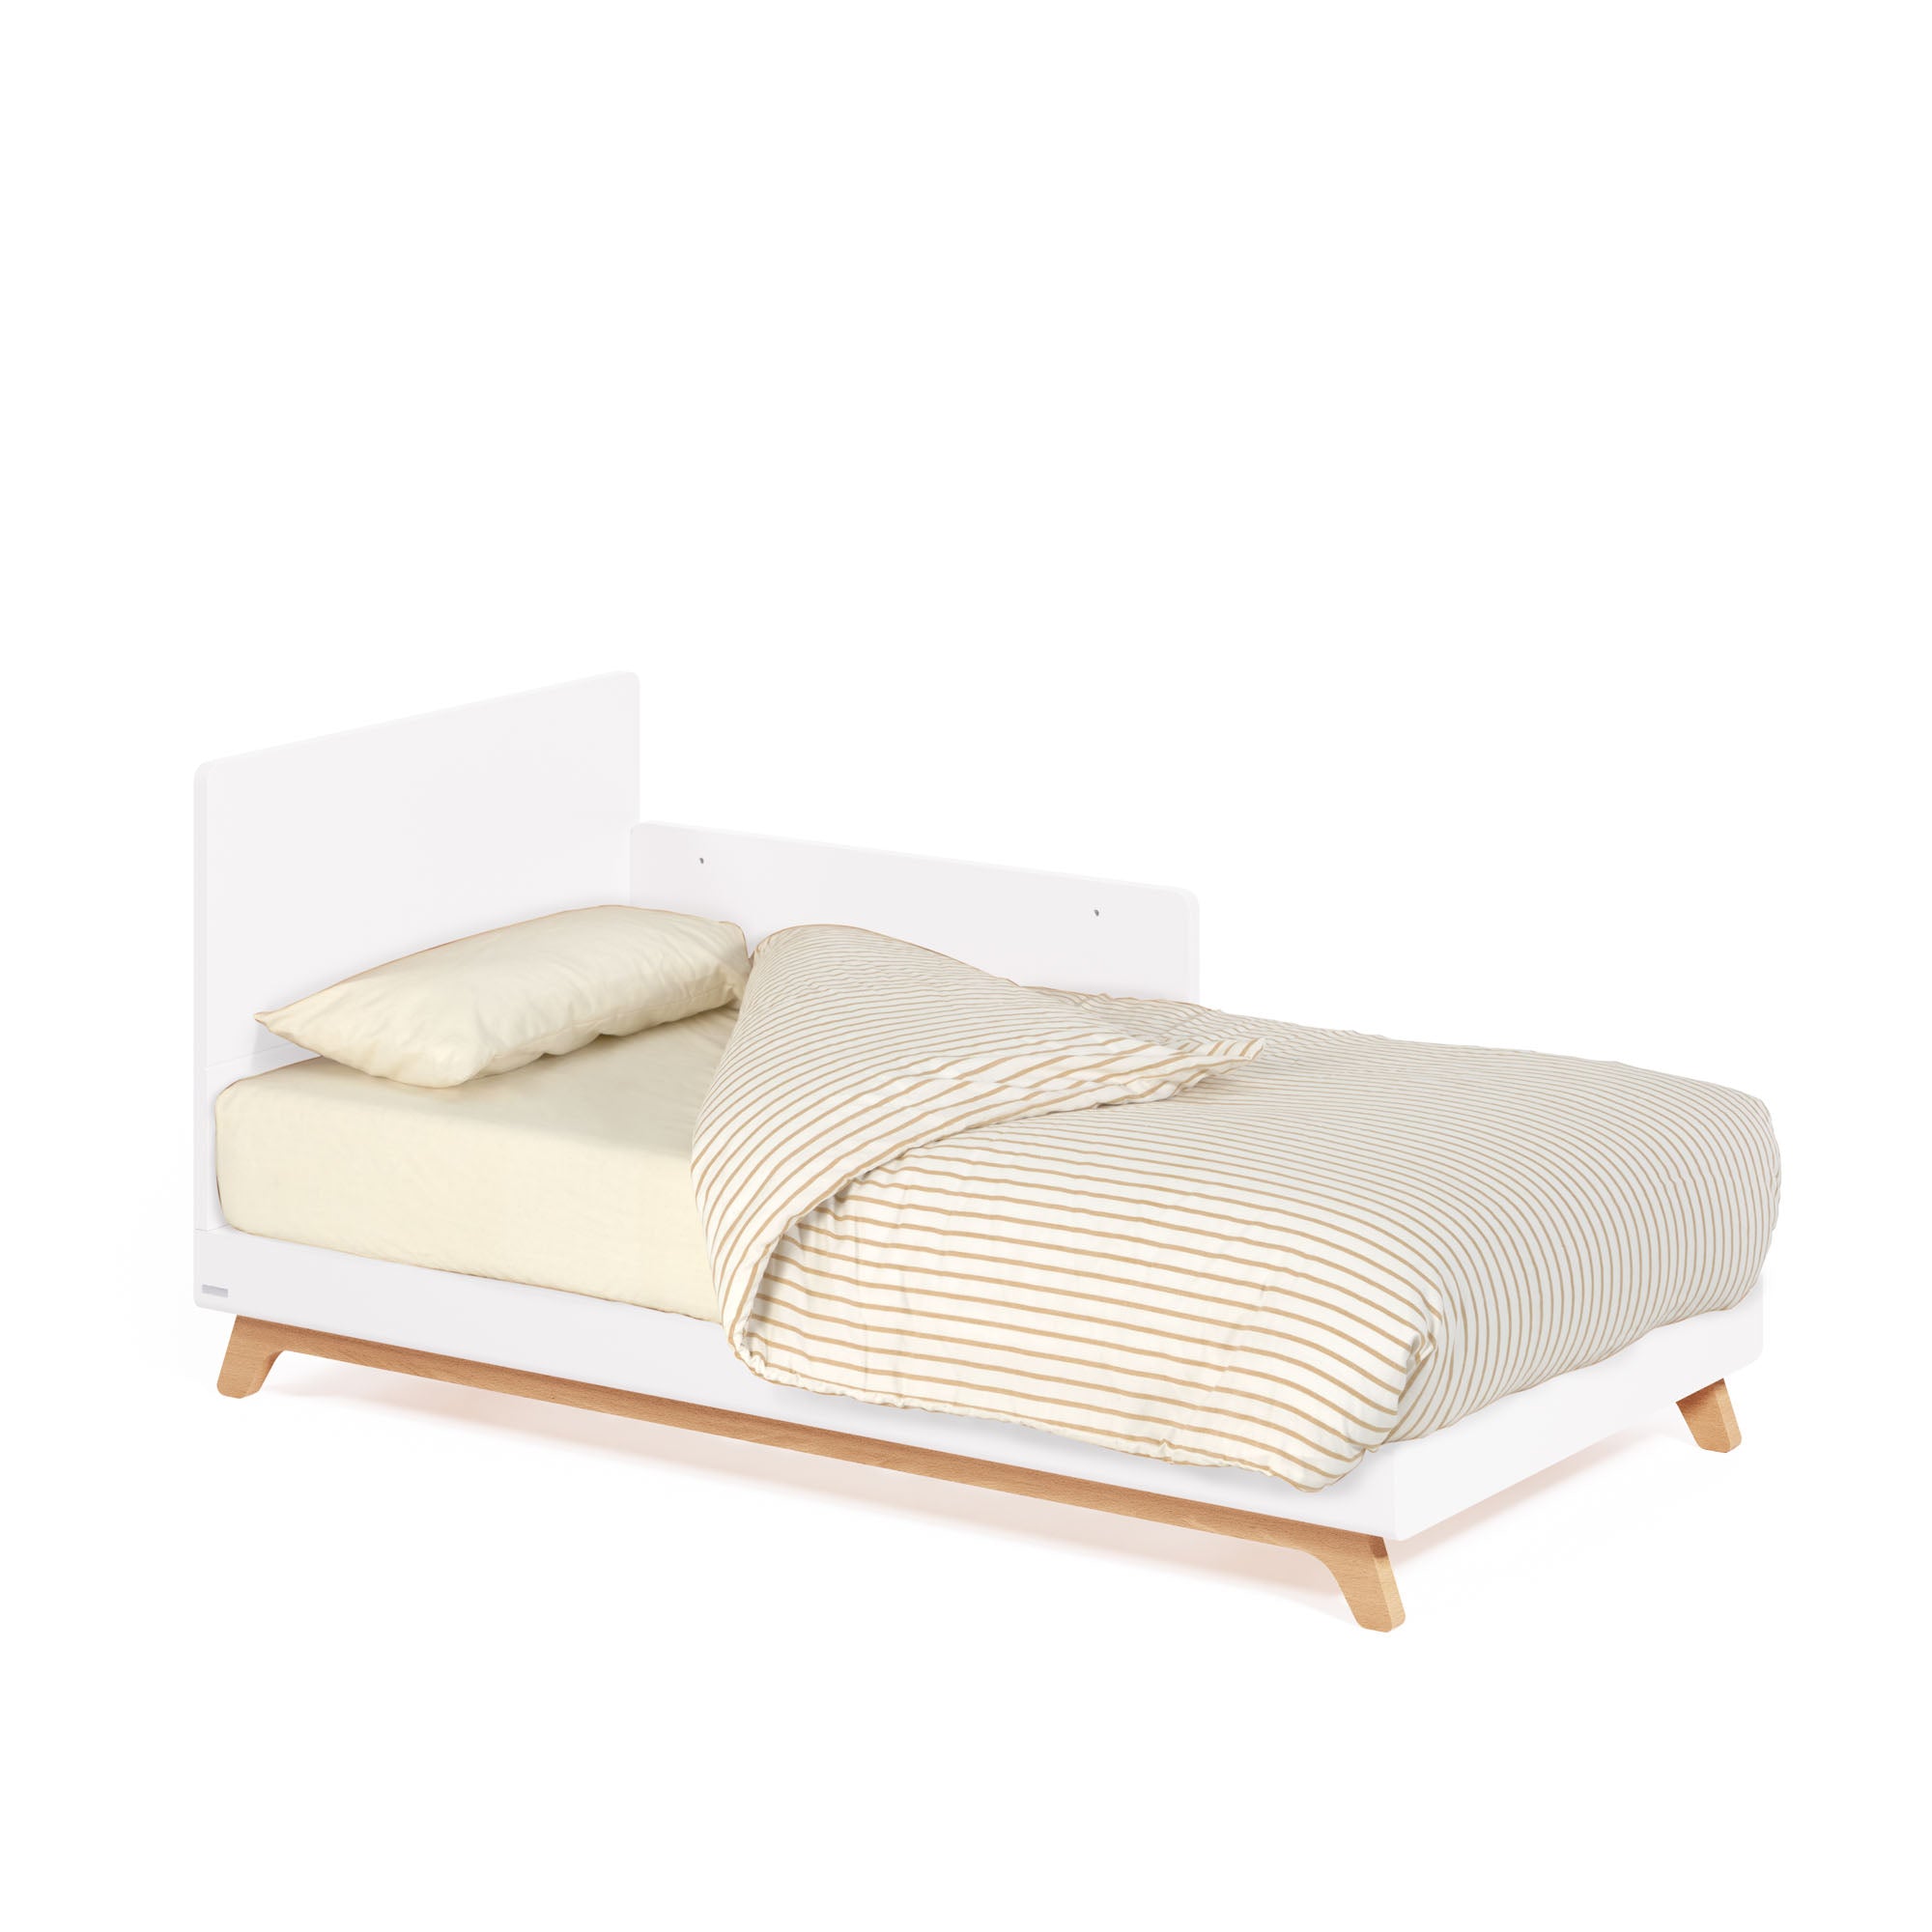 Maralis evolving cot made from solid beech wood with a white finish, 70 x 140 cm